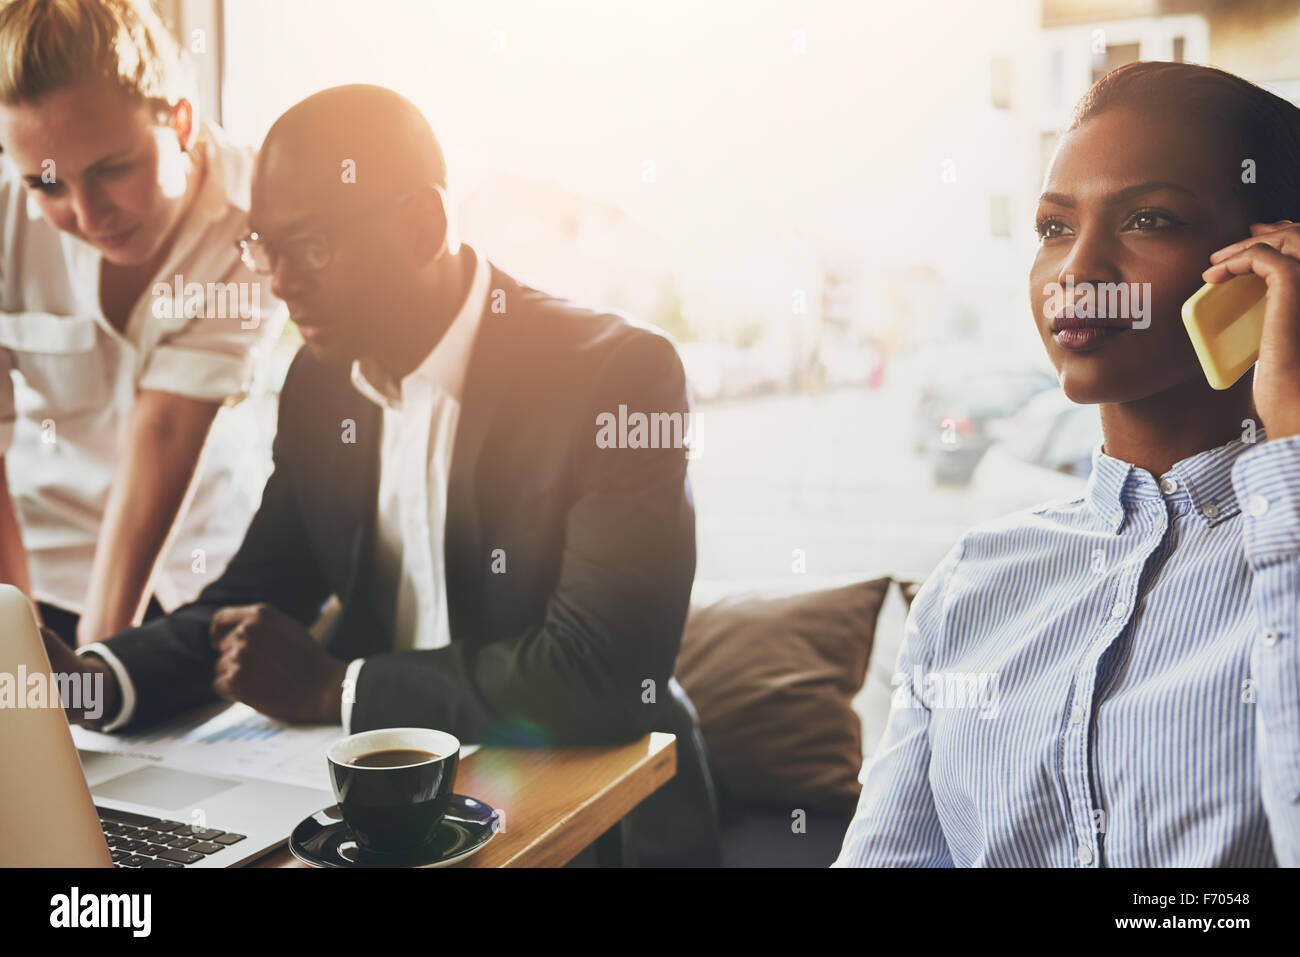 Group of ethnic business people working, young entrepreneurs, multi ethnic. Stock Photo